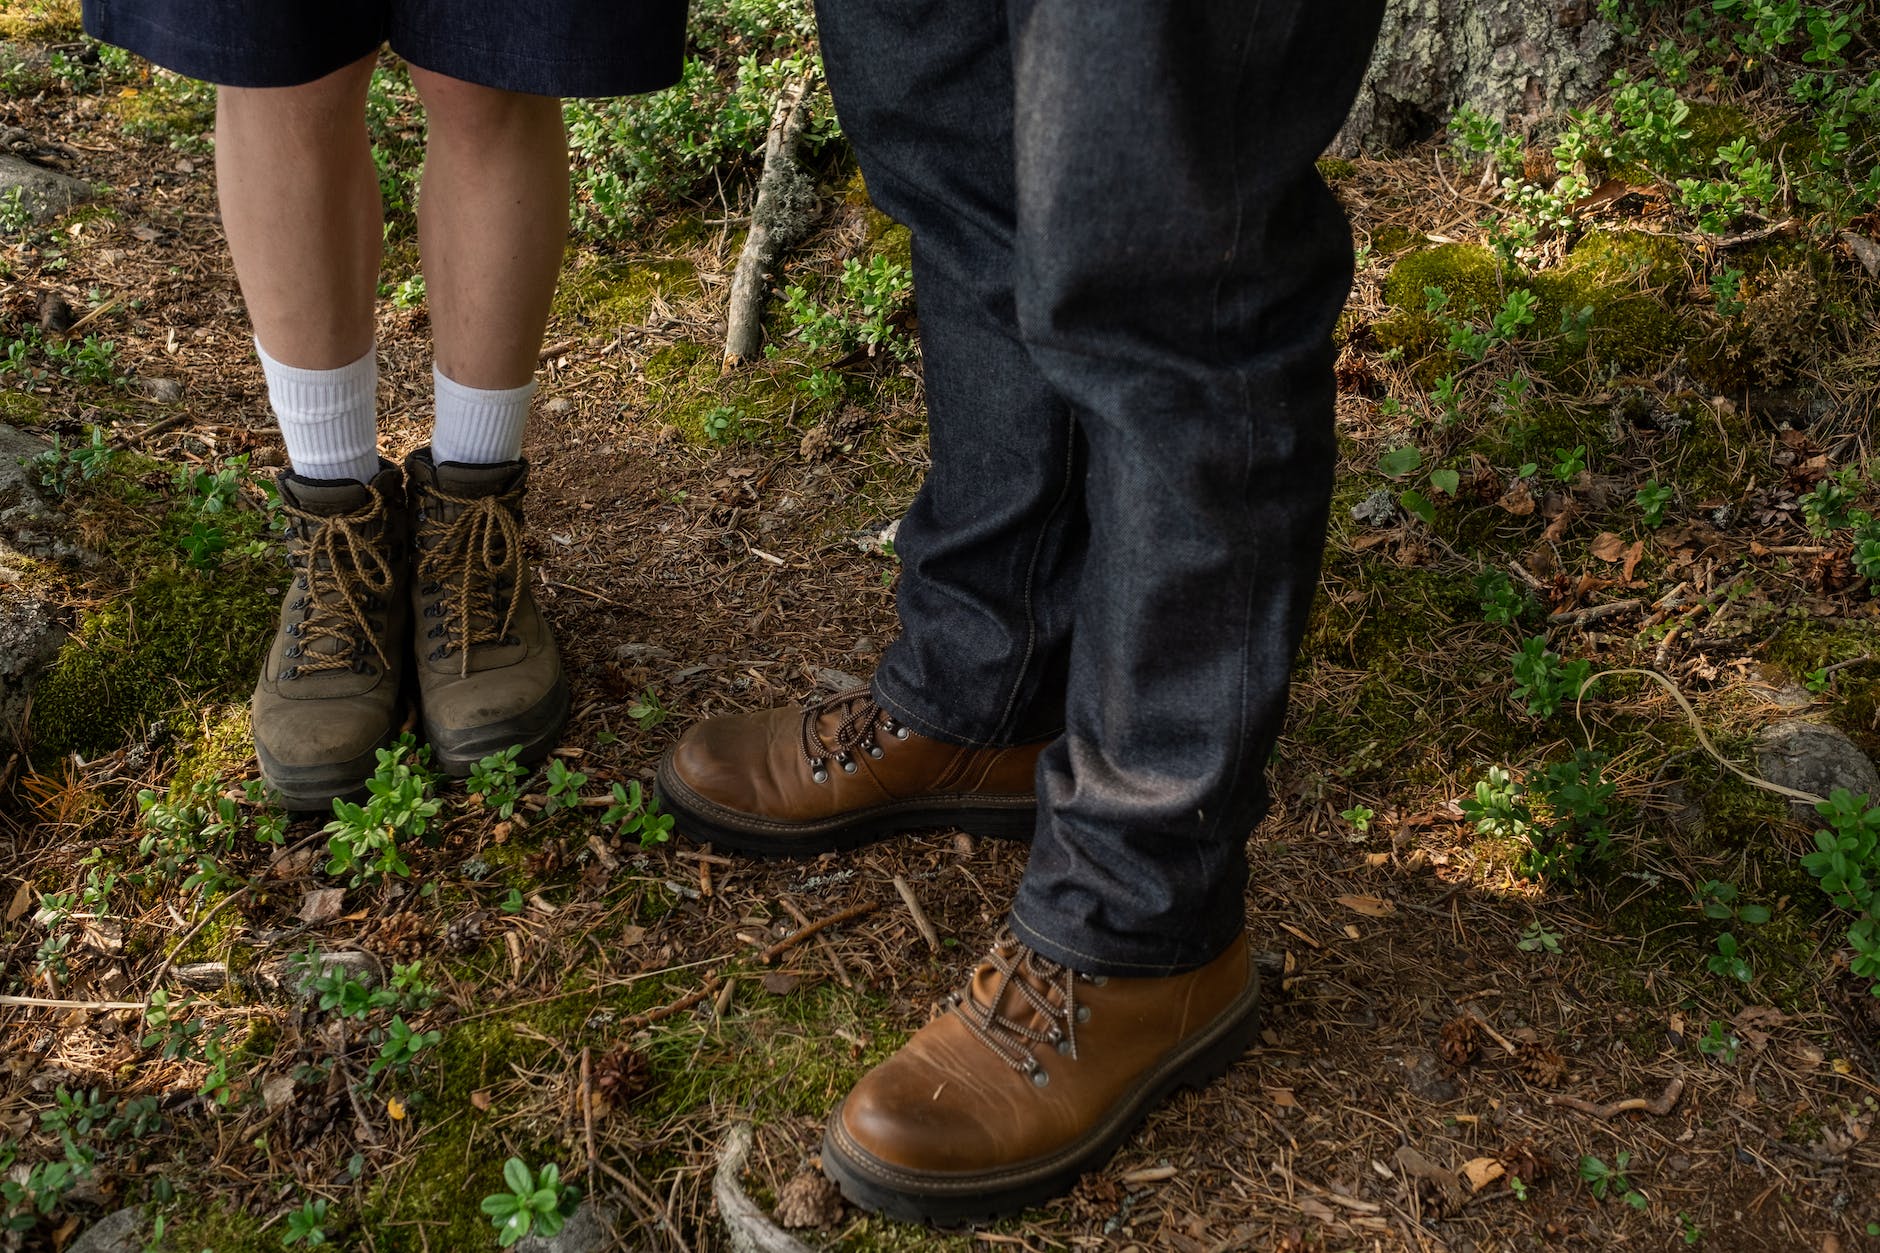 footwear worn by man and boy while hiking in forest